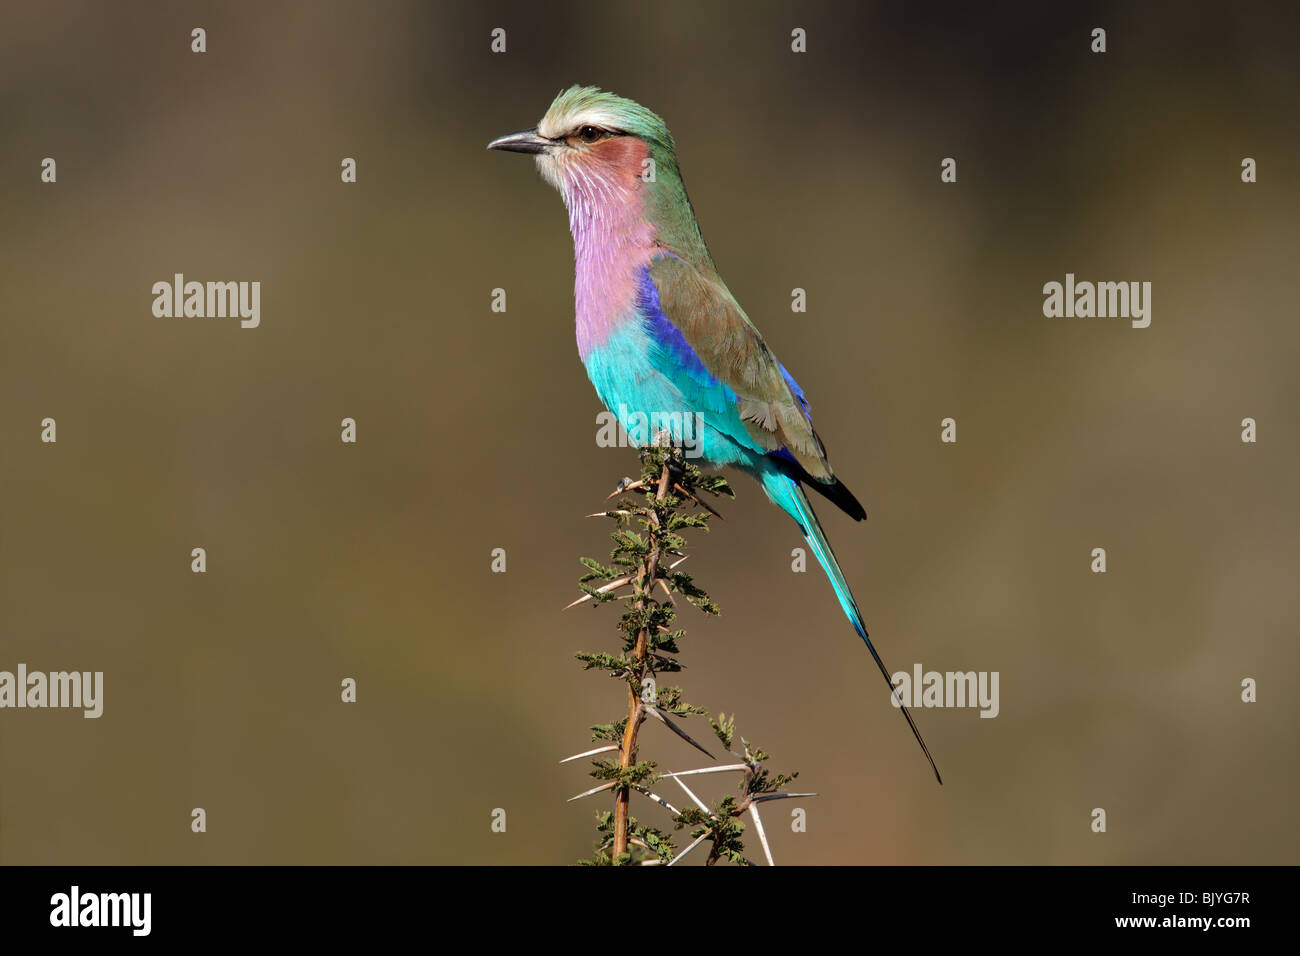 Lilac-breasted roller (Coratias caudata) perched on a branch, South Africa Stock Photo